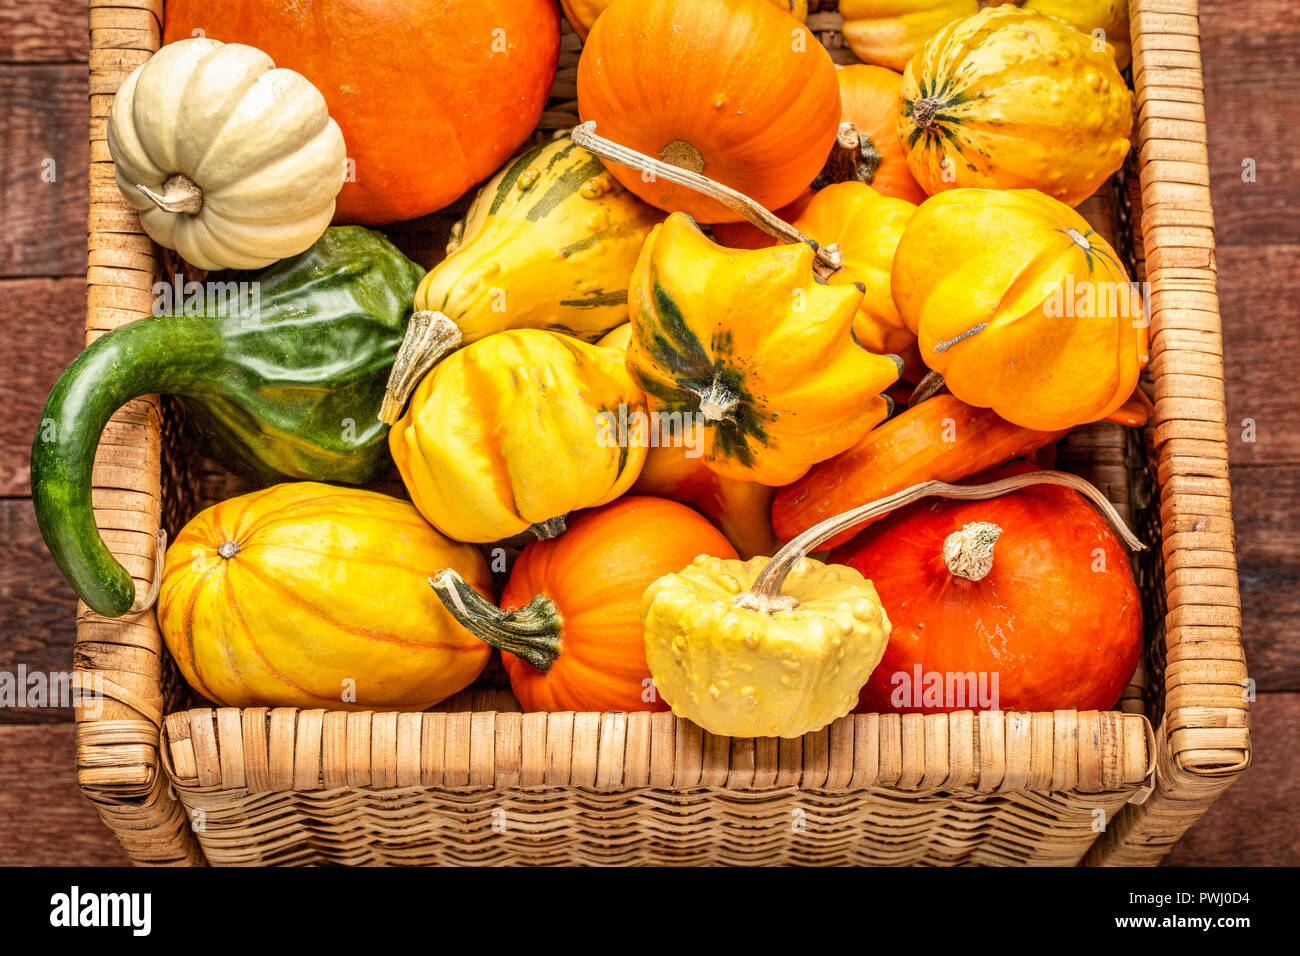 background of colorful winter squash and ornamental gourds in a basket Stock Photo